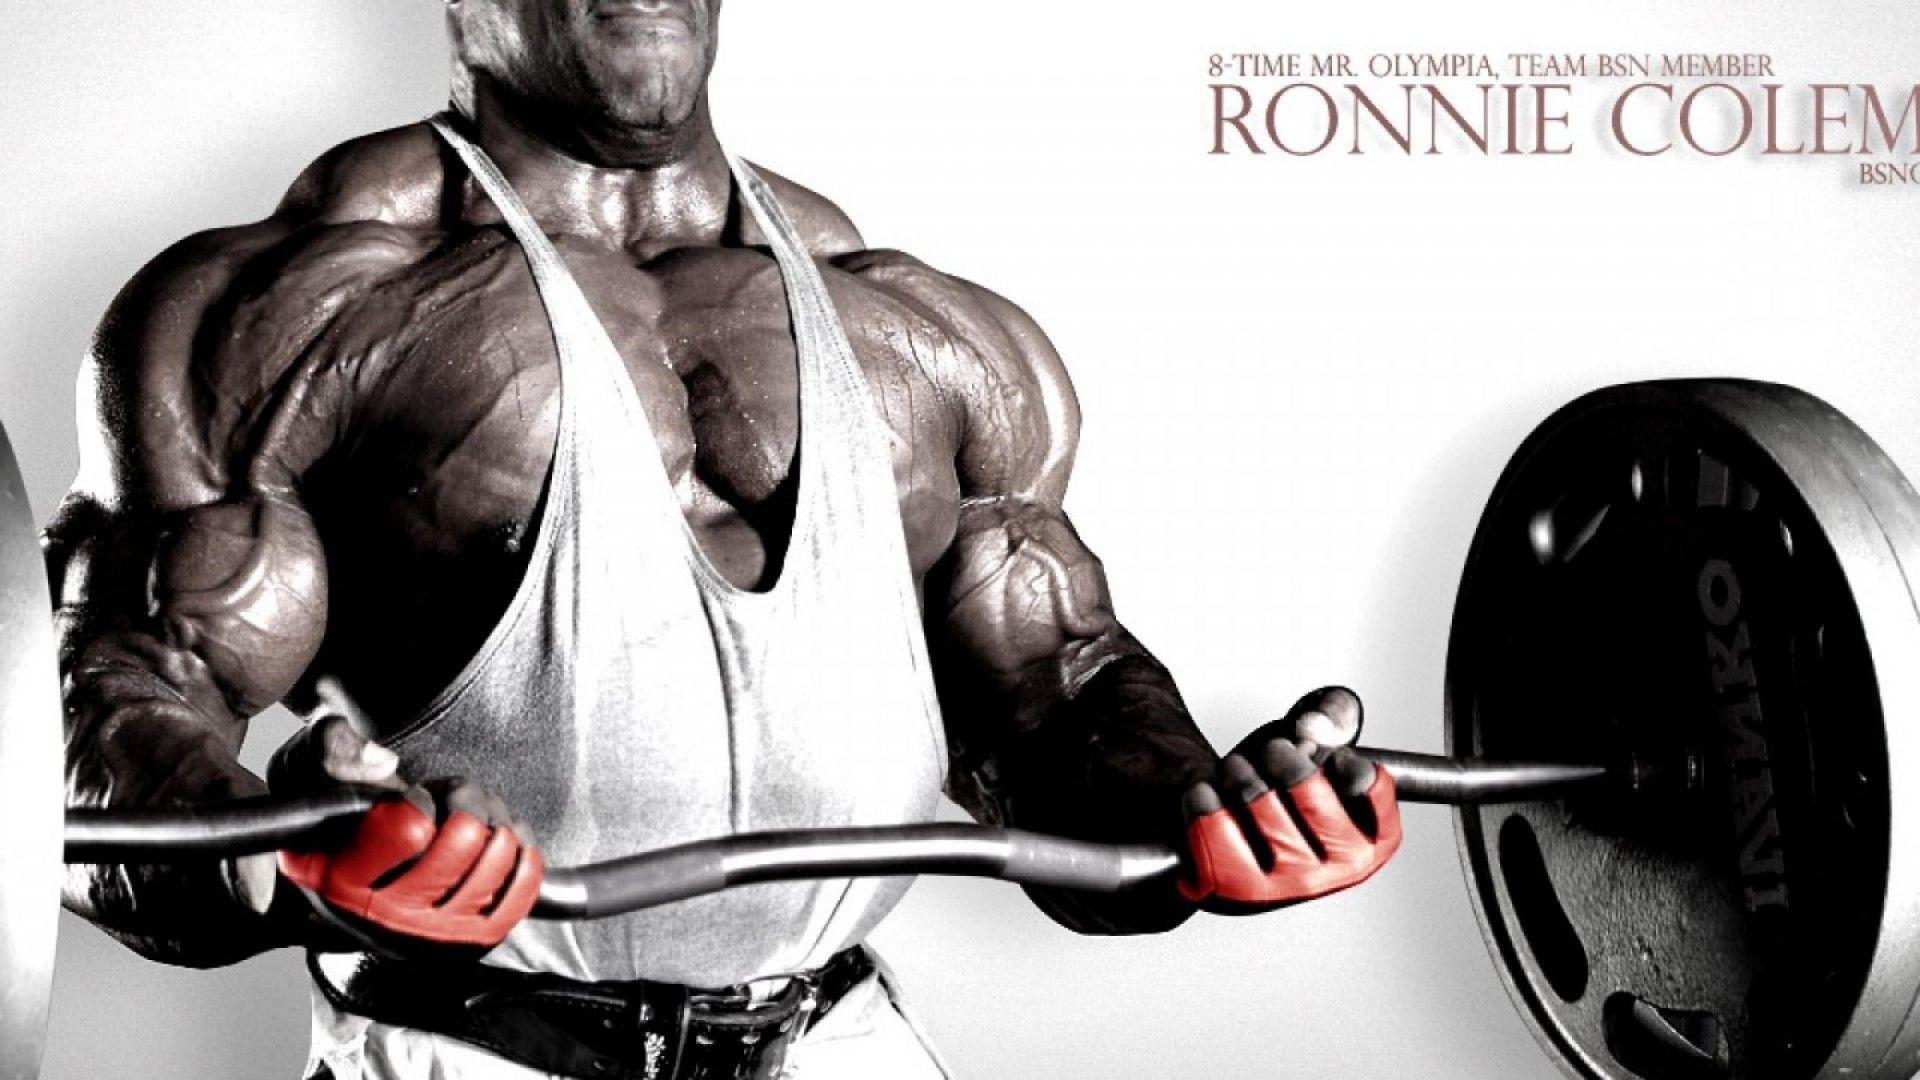 Ronnie Coleman 8 Time Mr Olympia free desktop background and wallpaper